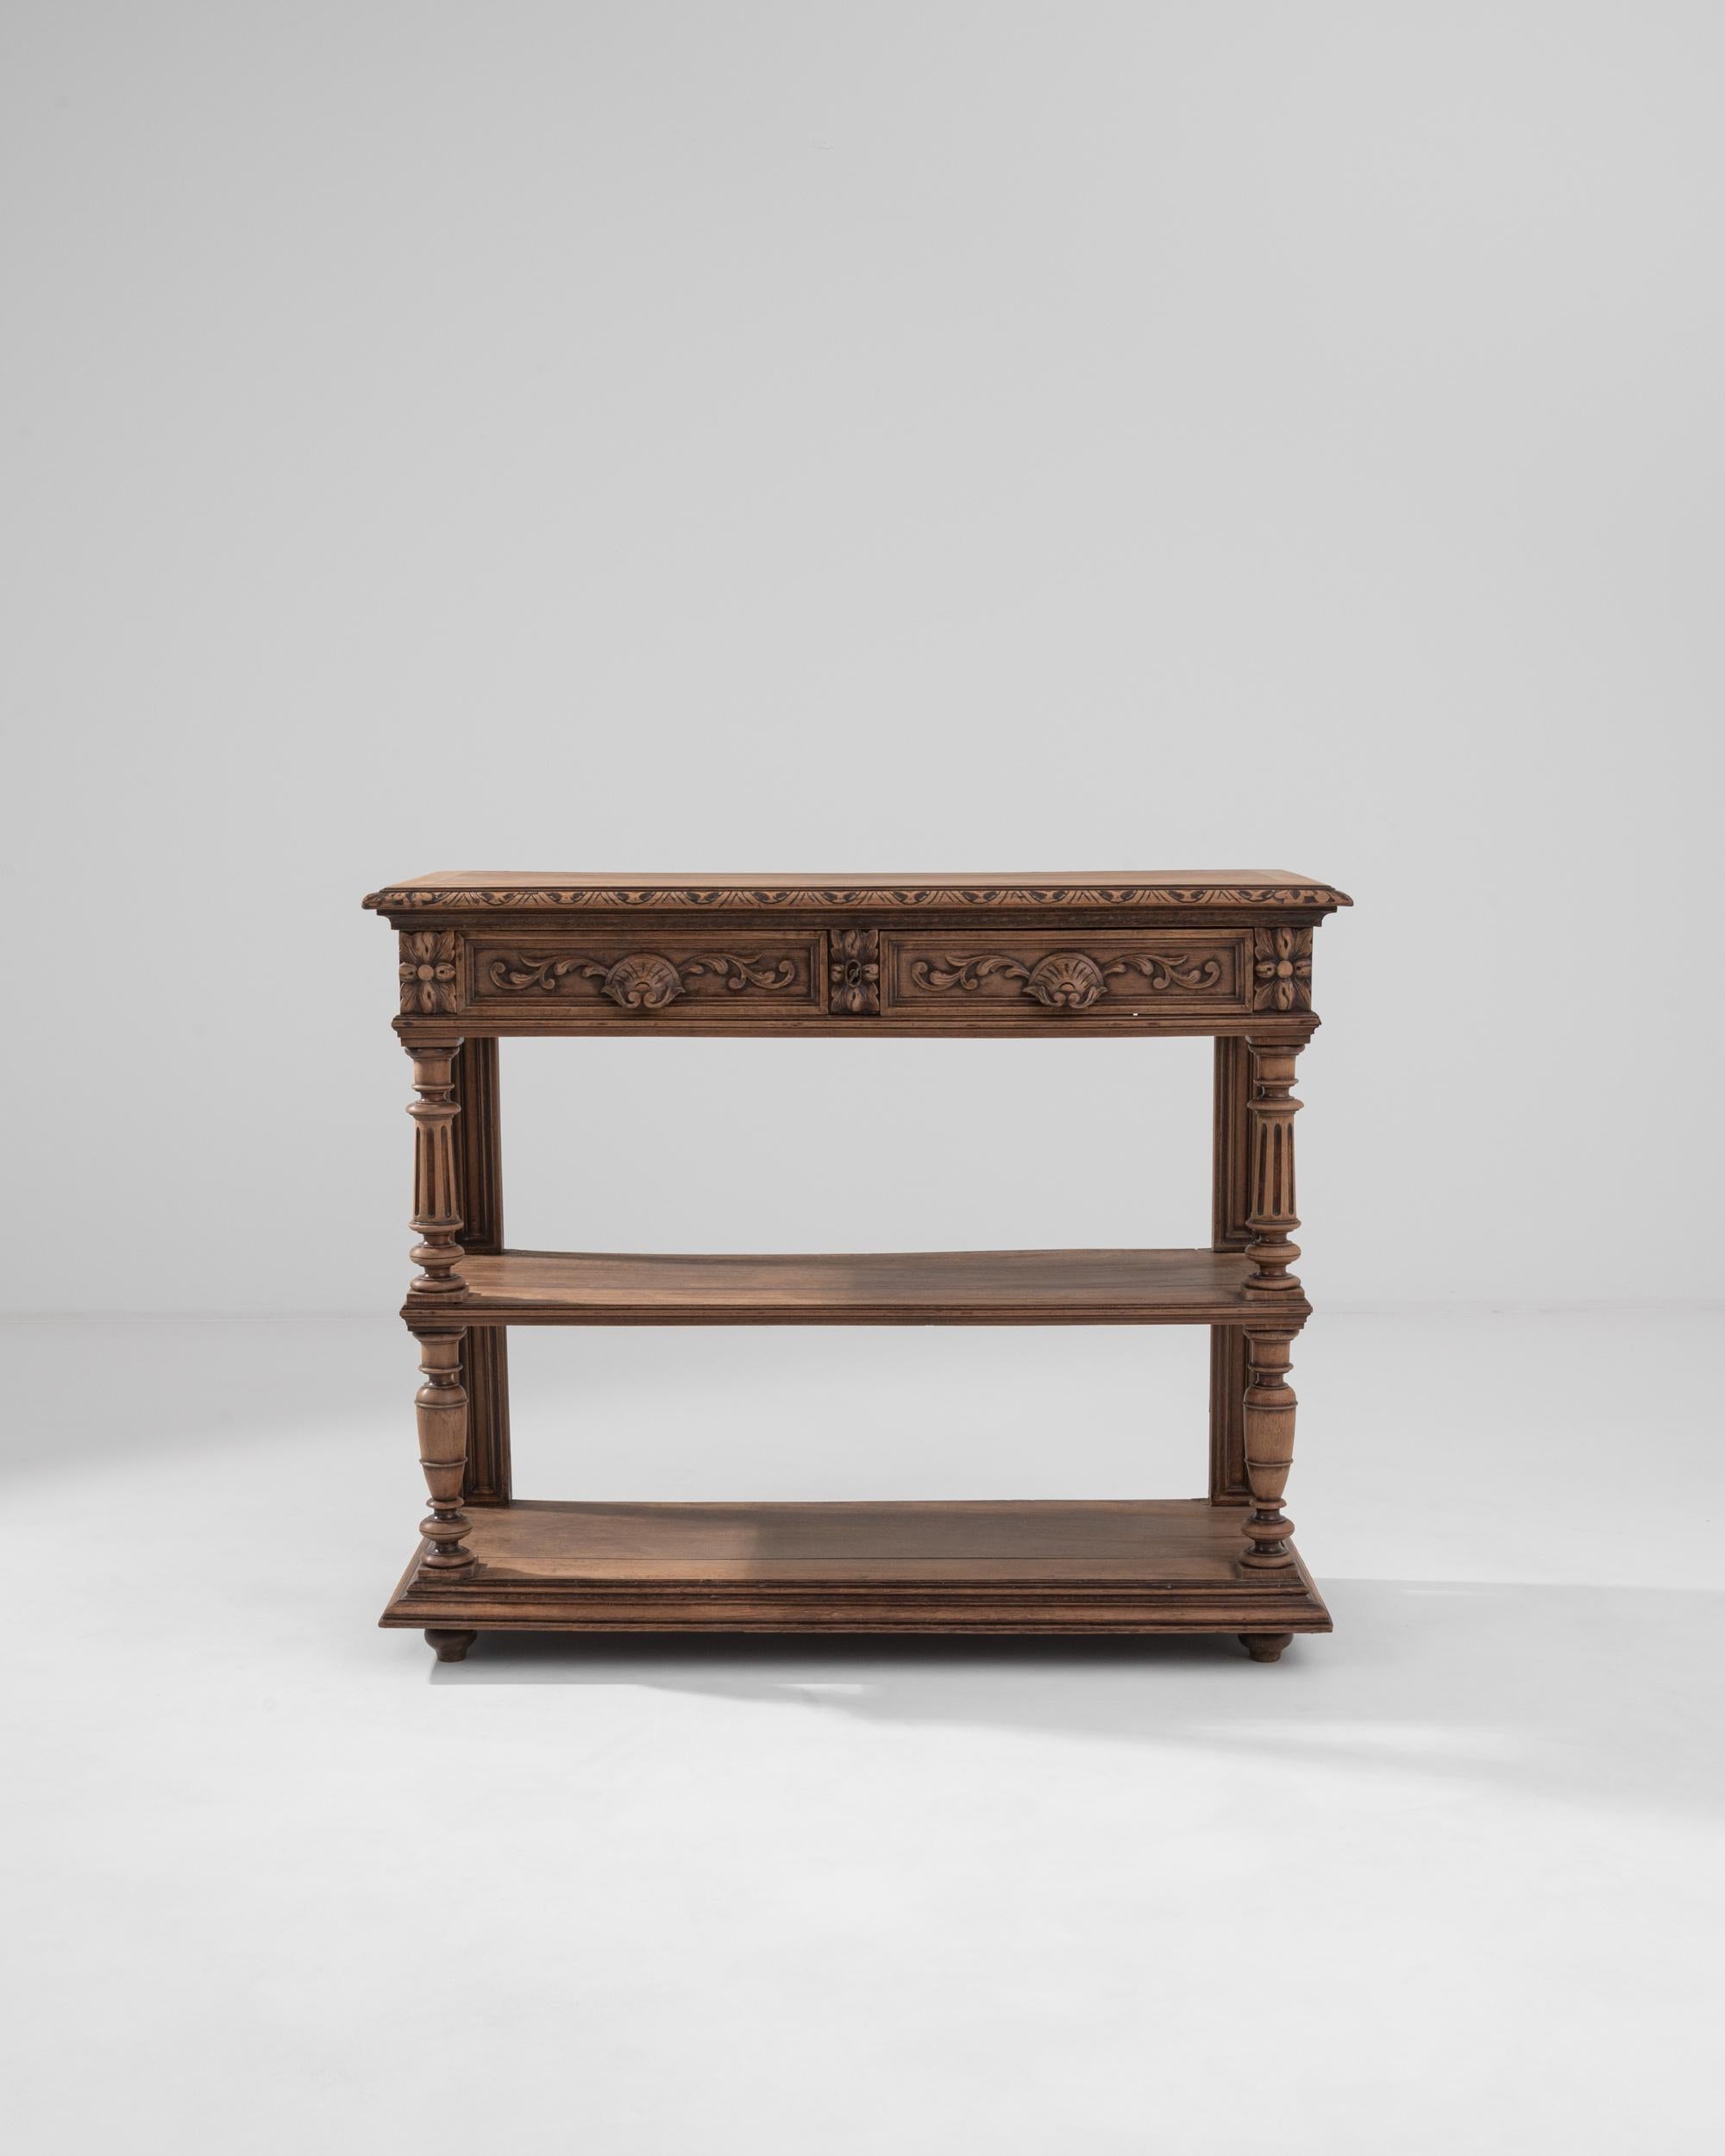 This oak console table was made in 19th century France. The top of this intriguing piece folds up to reveal a desktop and gallery; and its undercover identity as a moonlight writing table. Eye-catching carved motifs line the edge of the table top,